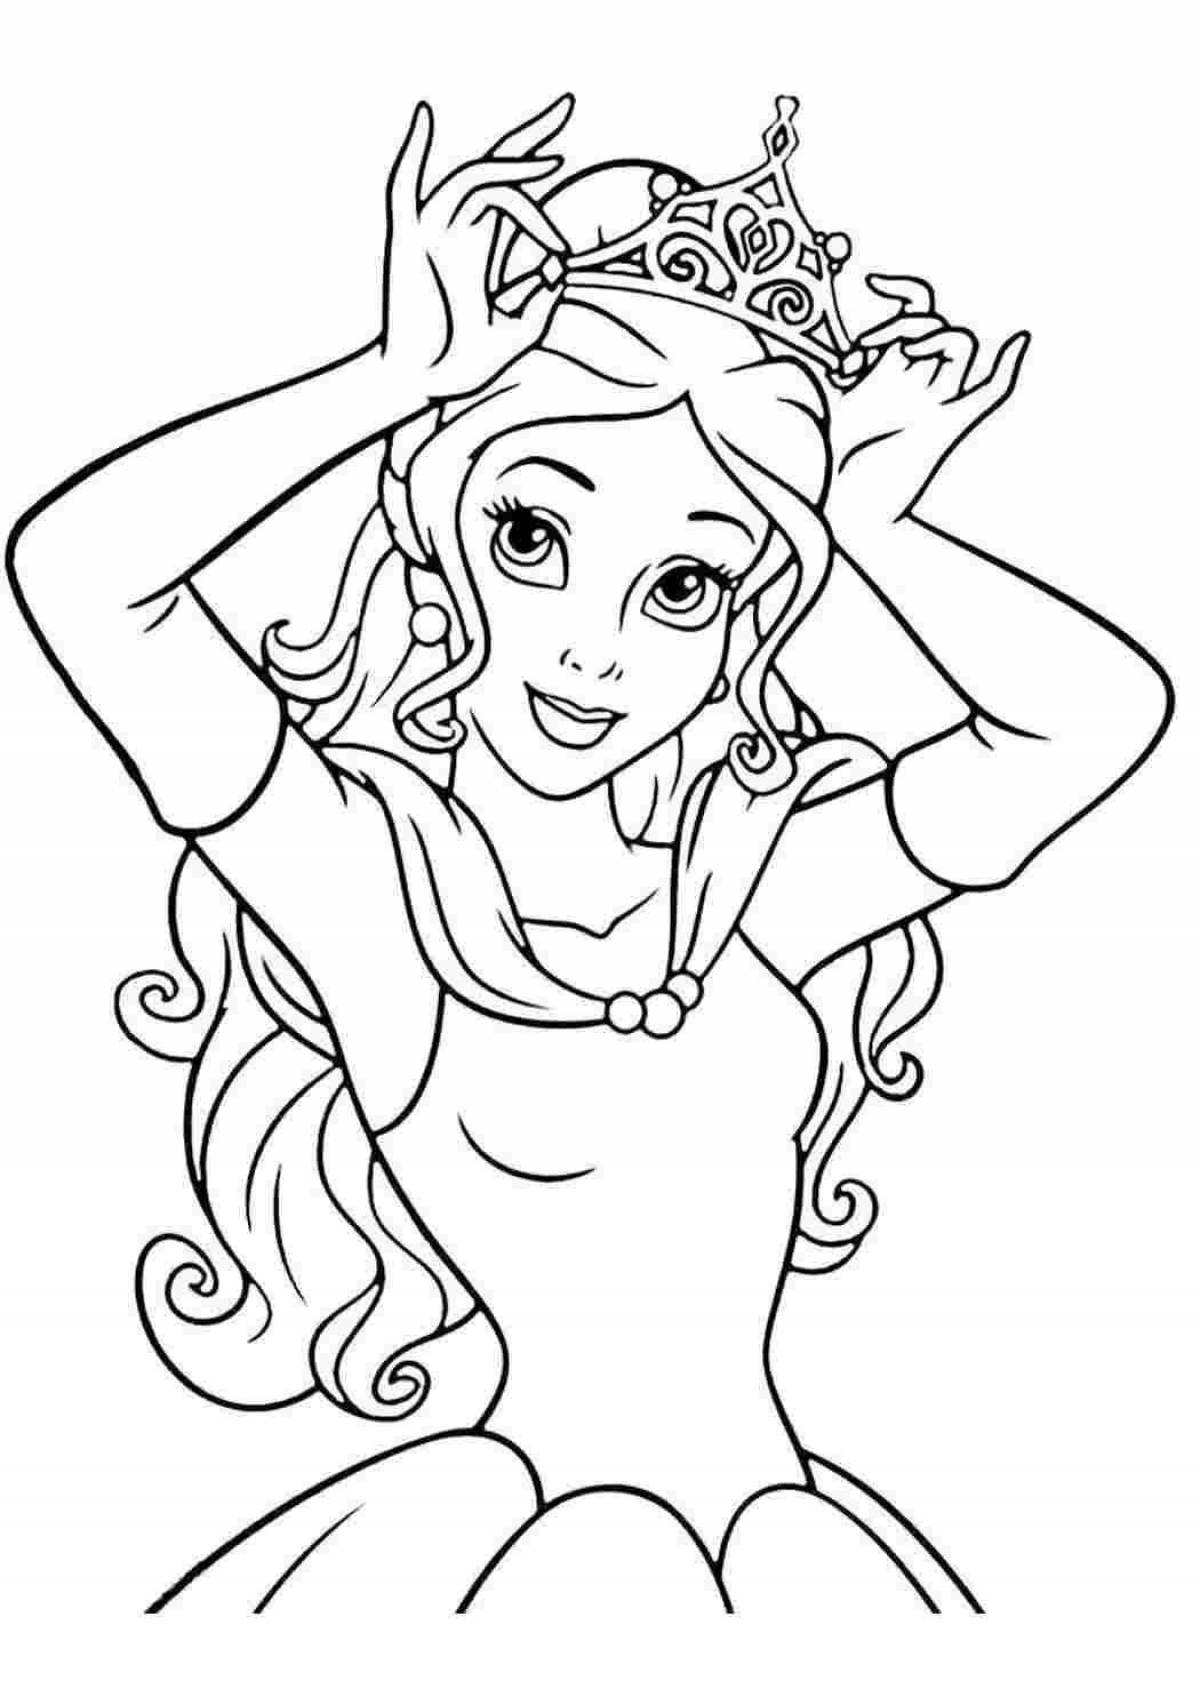 Belle's awesome coloring book